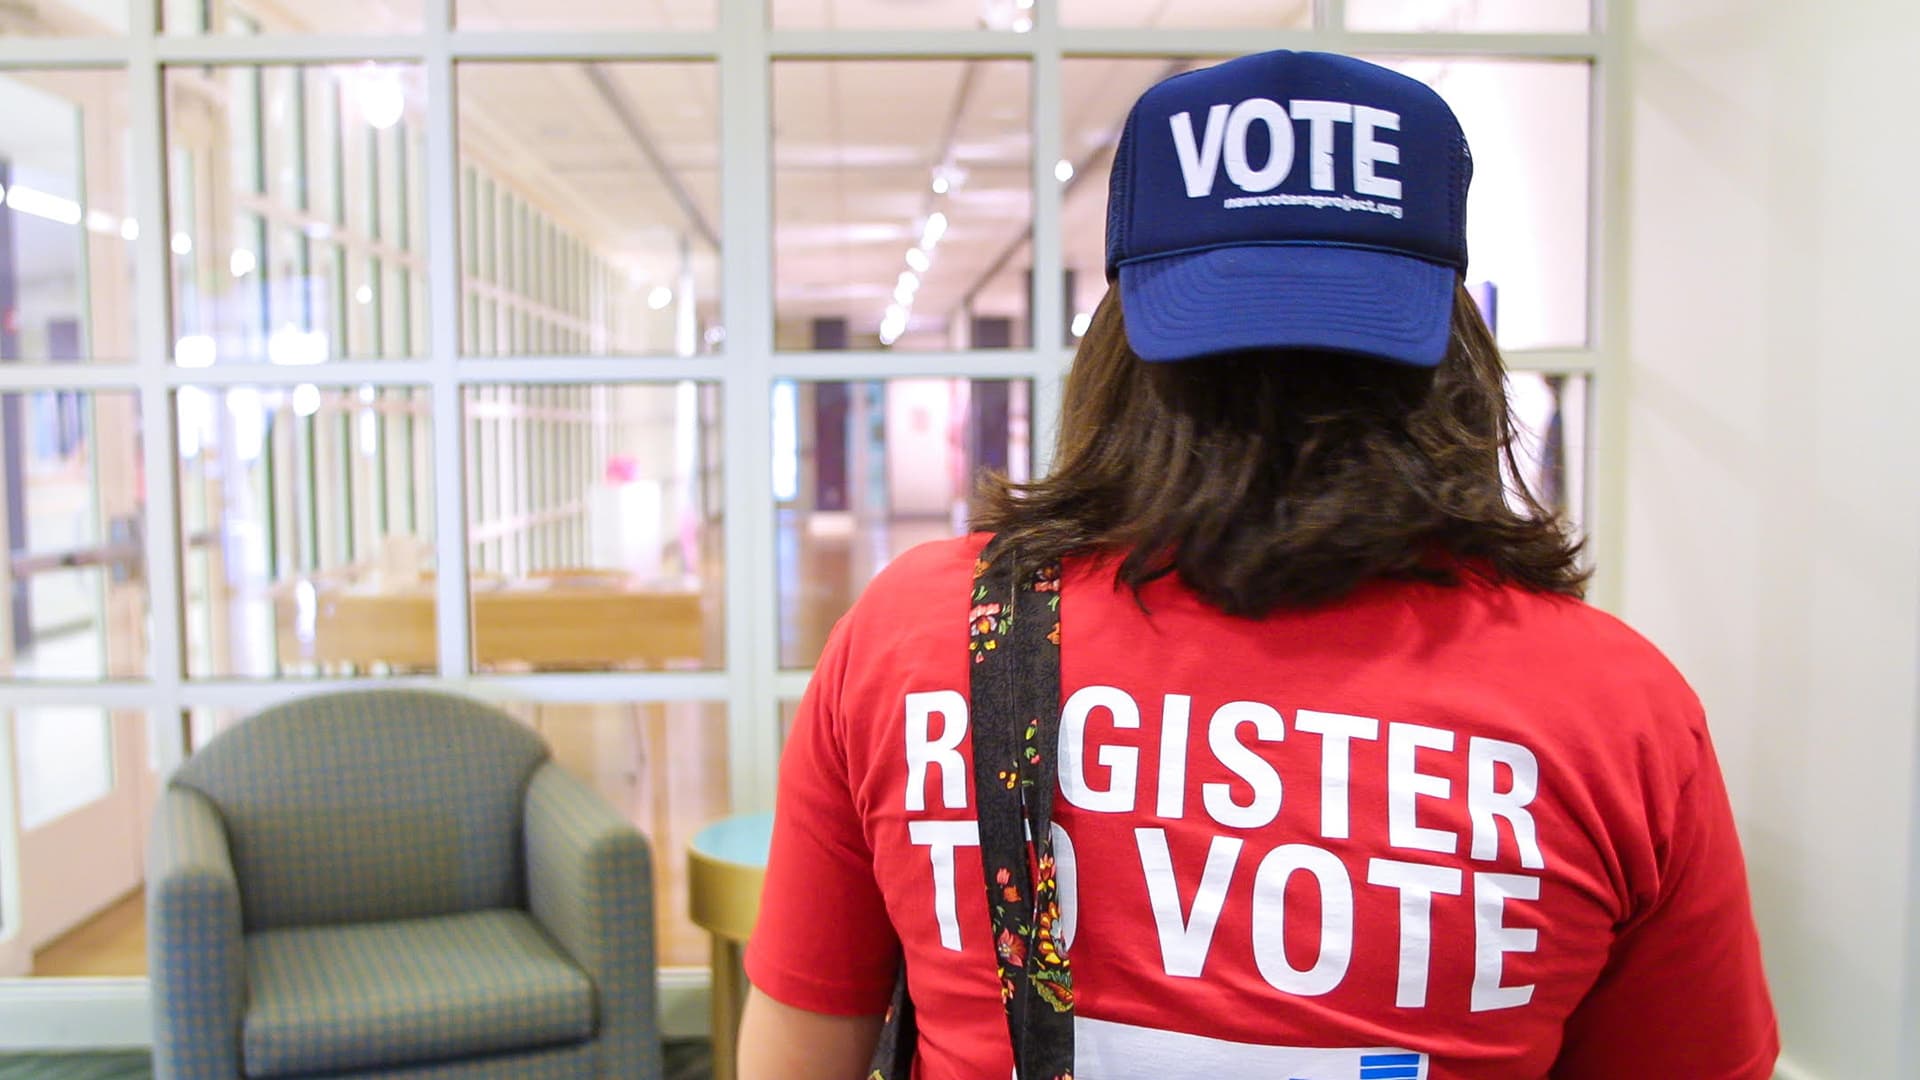 Student in "Vote" T-shirt